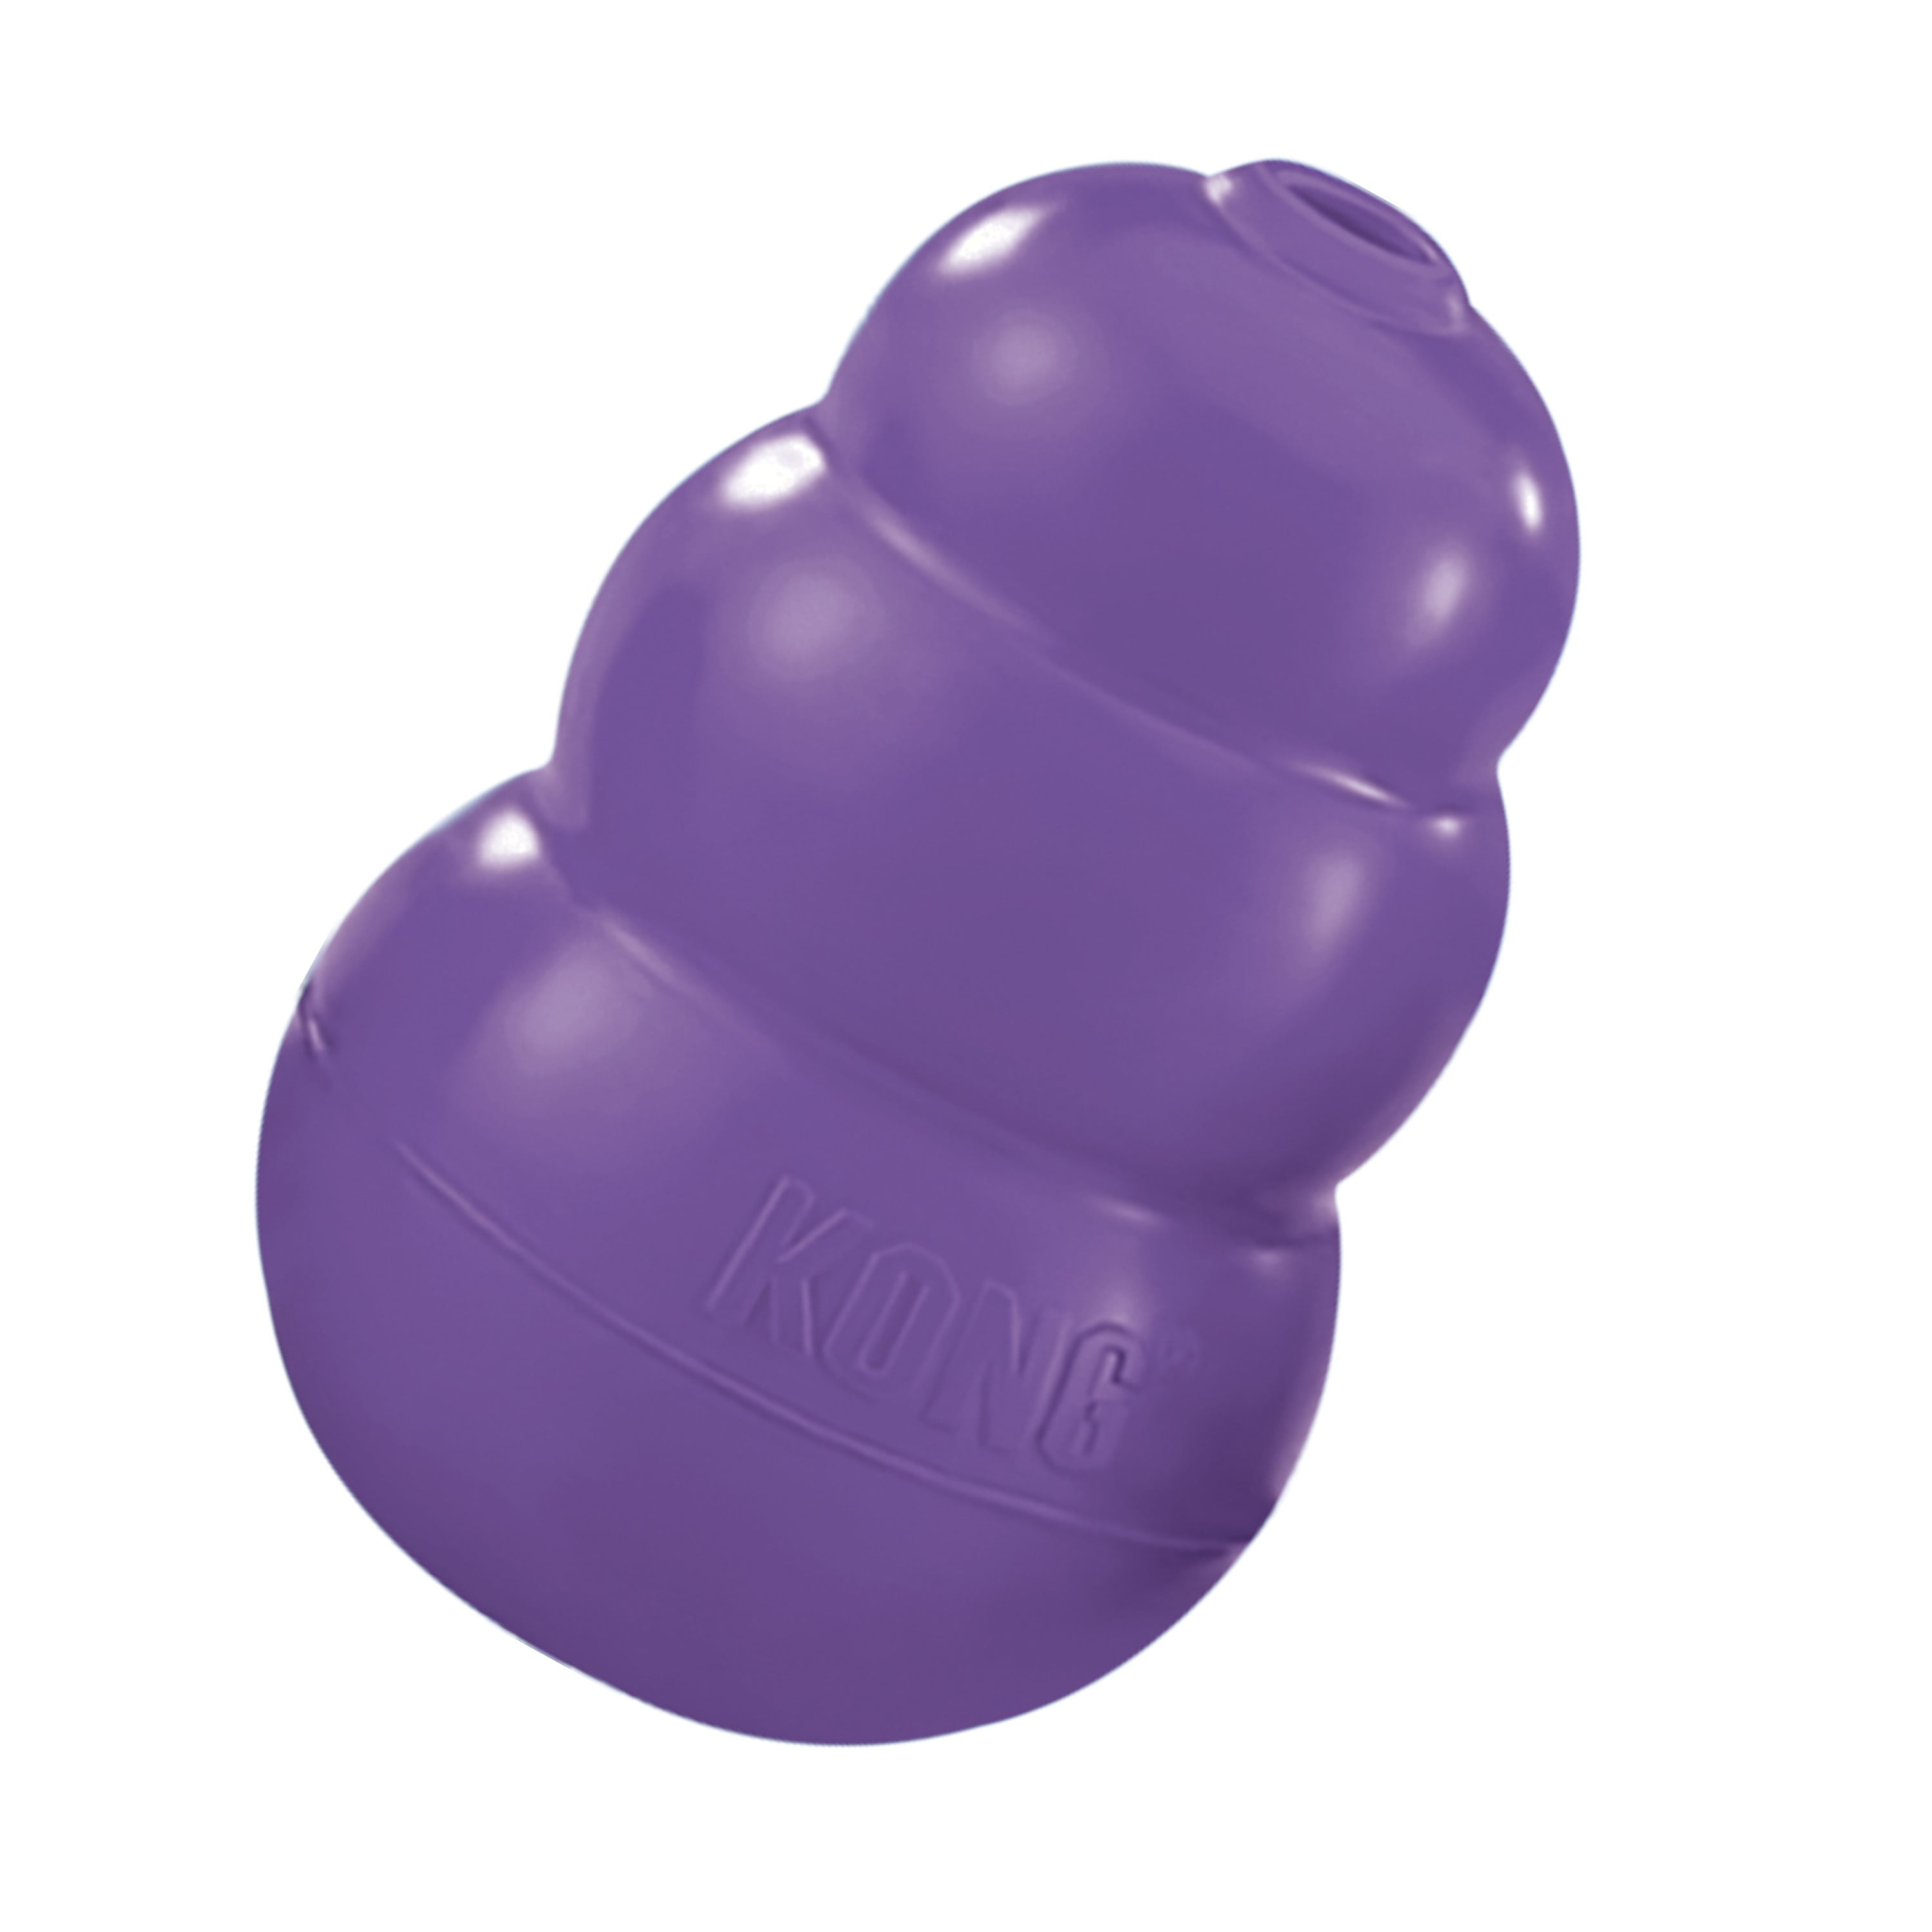 KONG - Senior Dog Toy - Gentle Natural Rubber - Fun to Chew, Chase and  Fetch - For Small Dogs